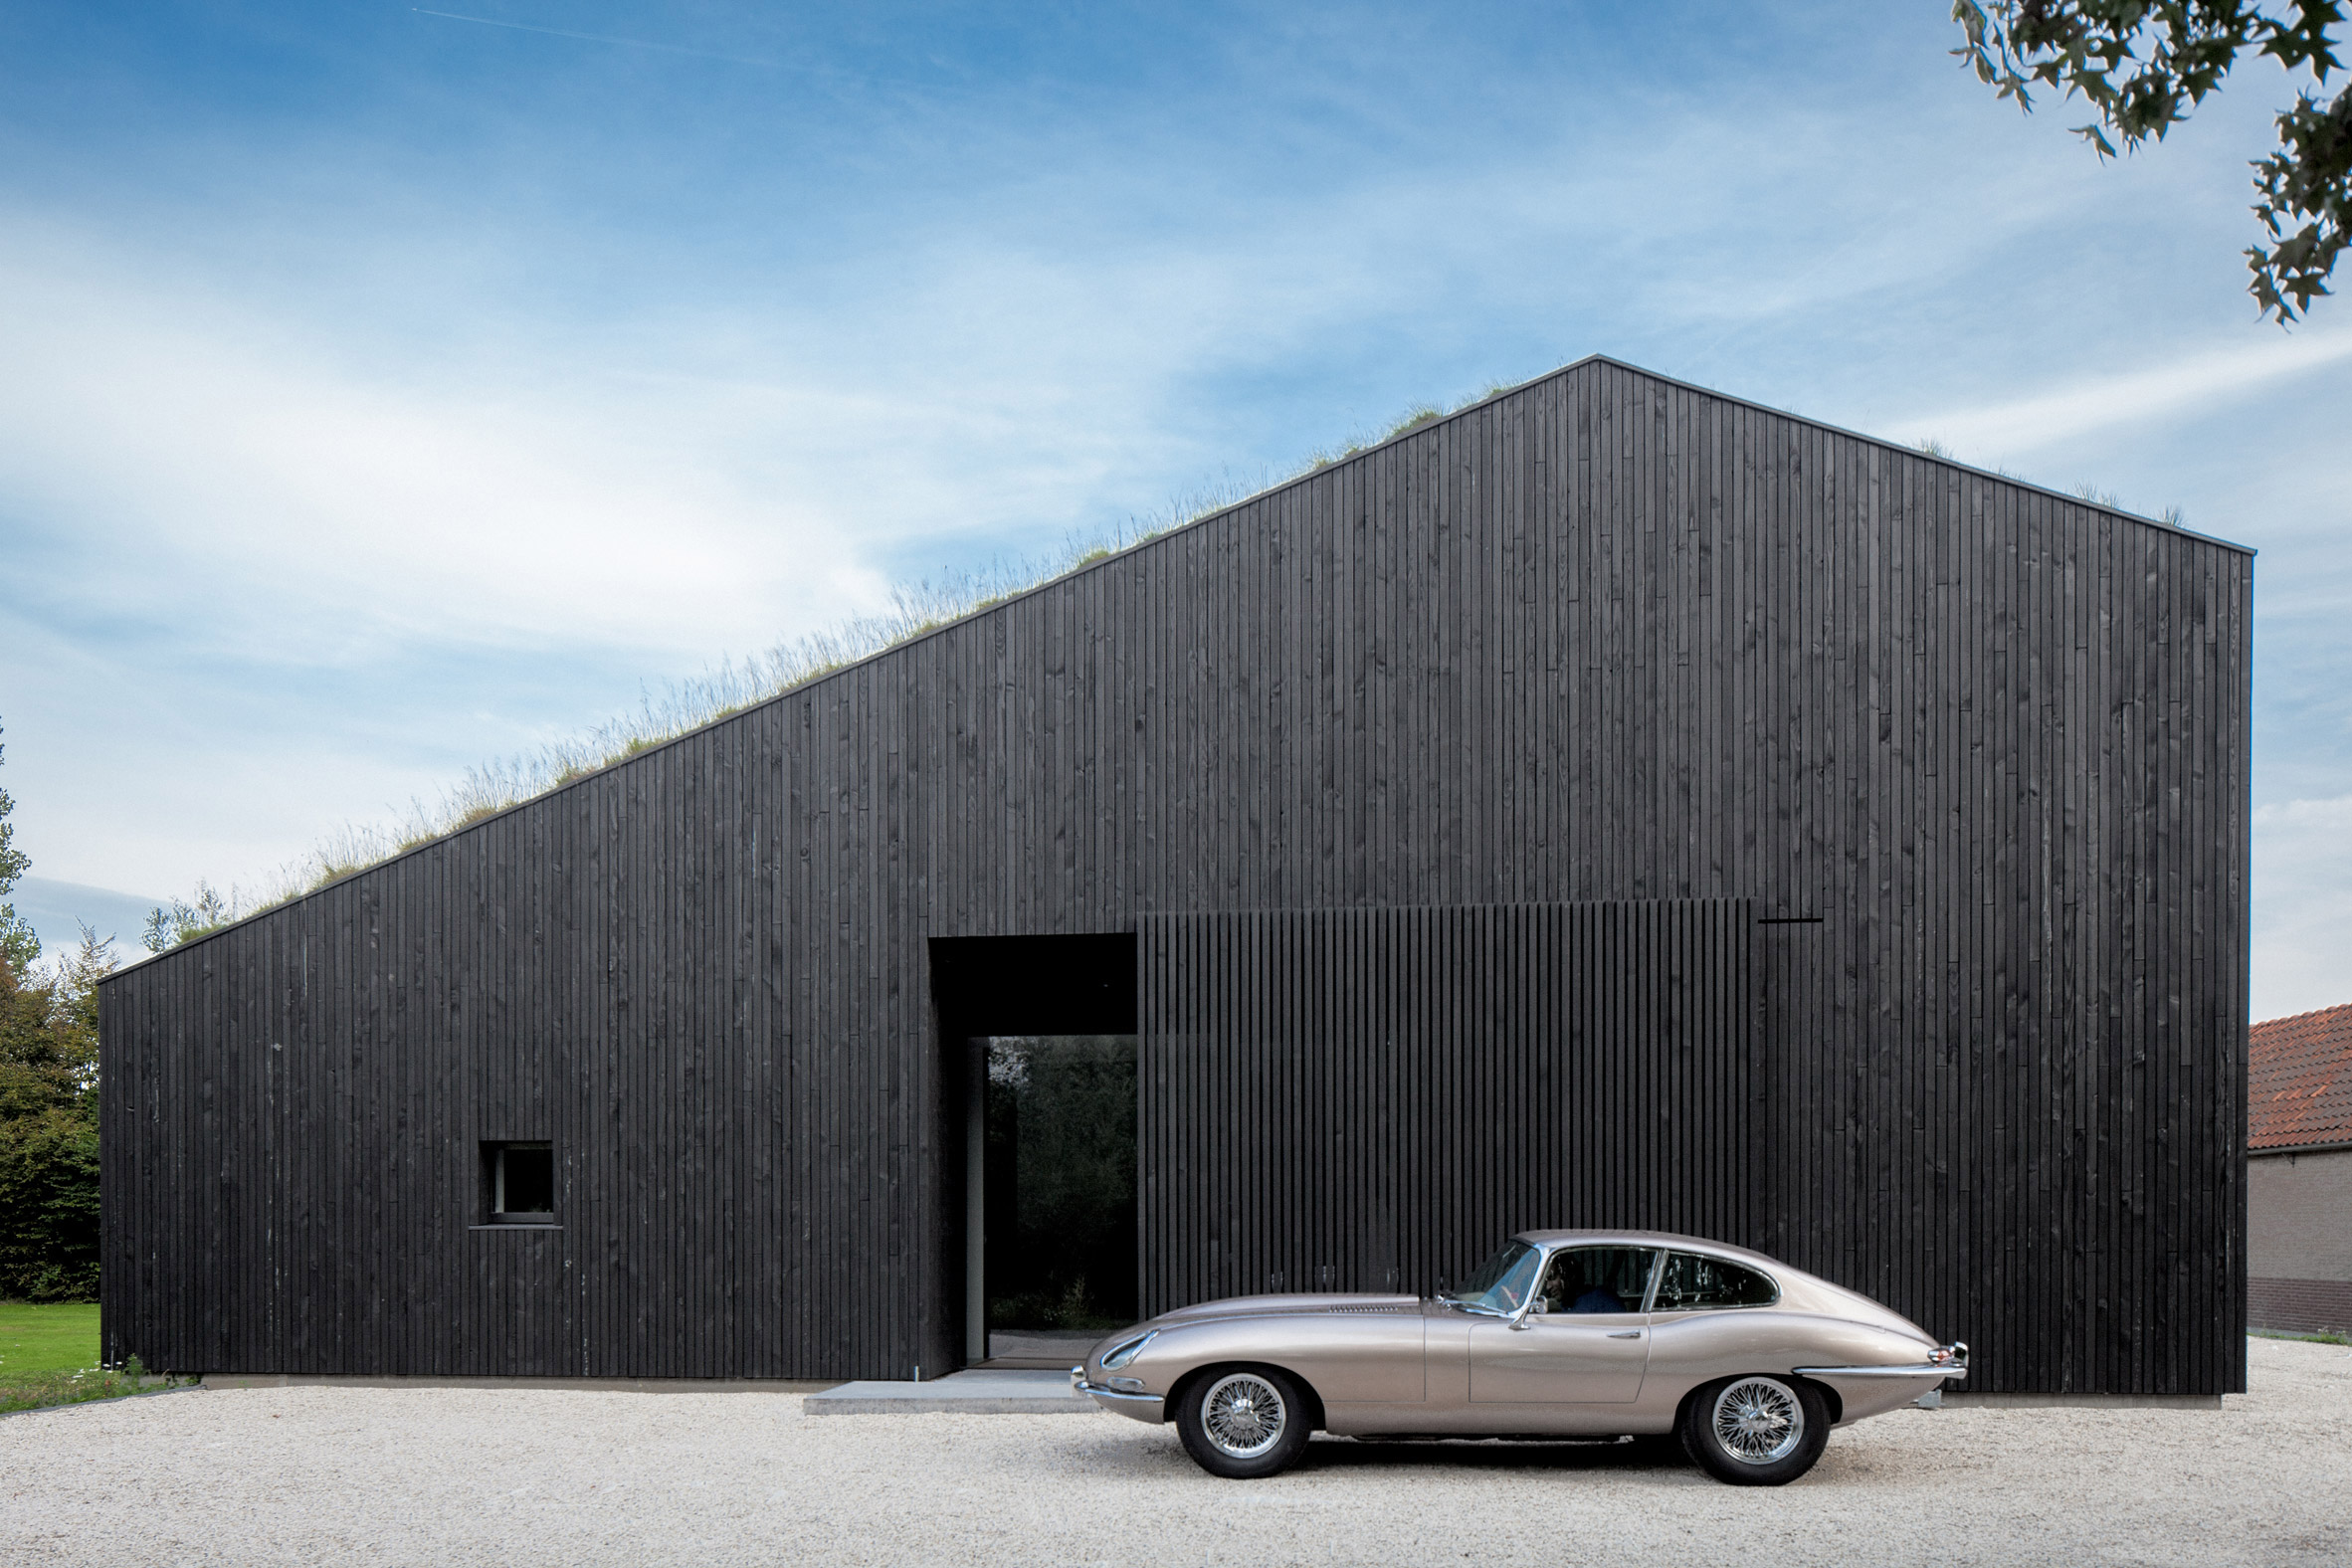 10 buildings that use classic cars to improve their image